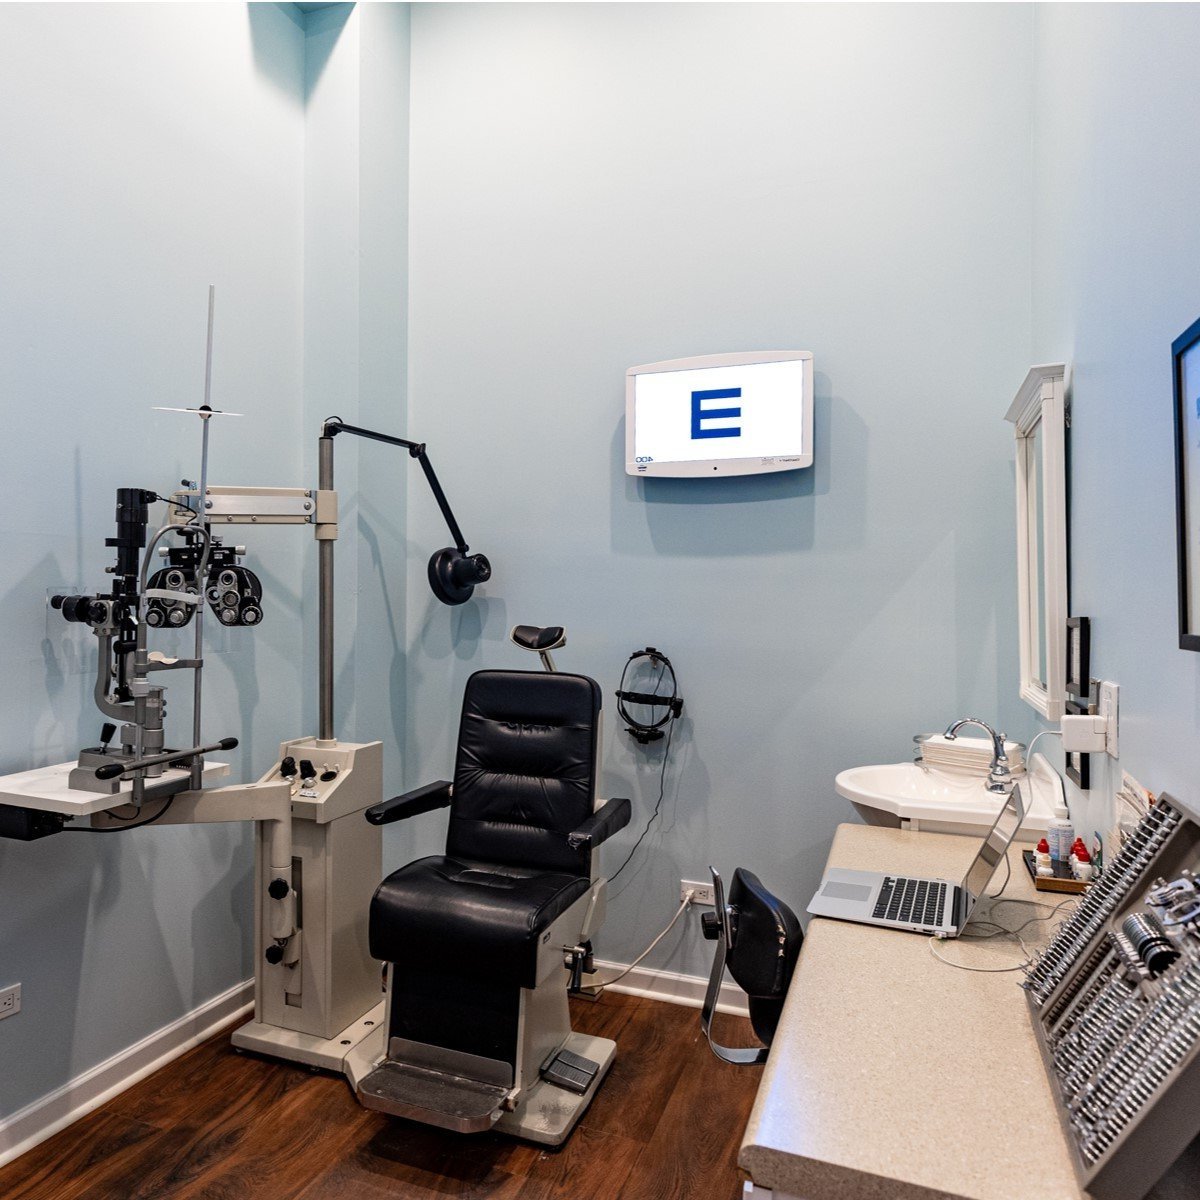 eyecare+services+and+eyewear+glassses+and+contact+lenses+urban+eyecare+chicago+2+3.jpg